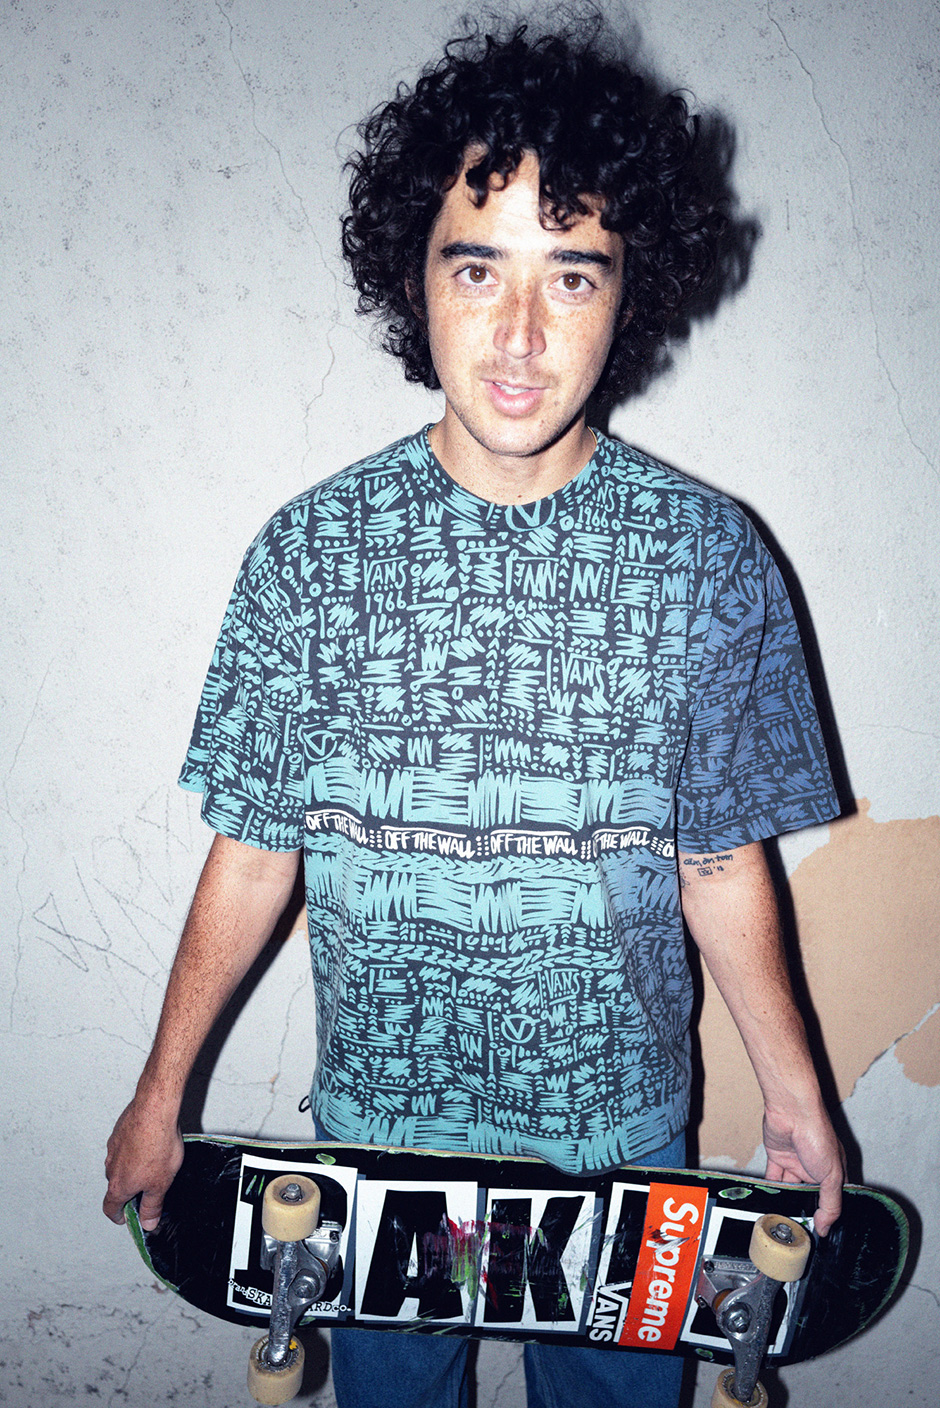 Rowan Zorilla Offerings interview for Slam City Skates, portrait by Anthony Acosta